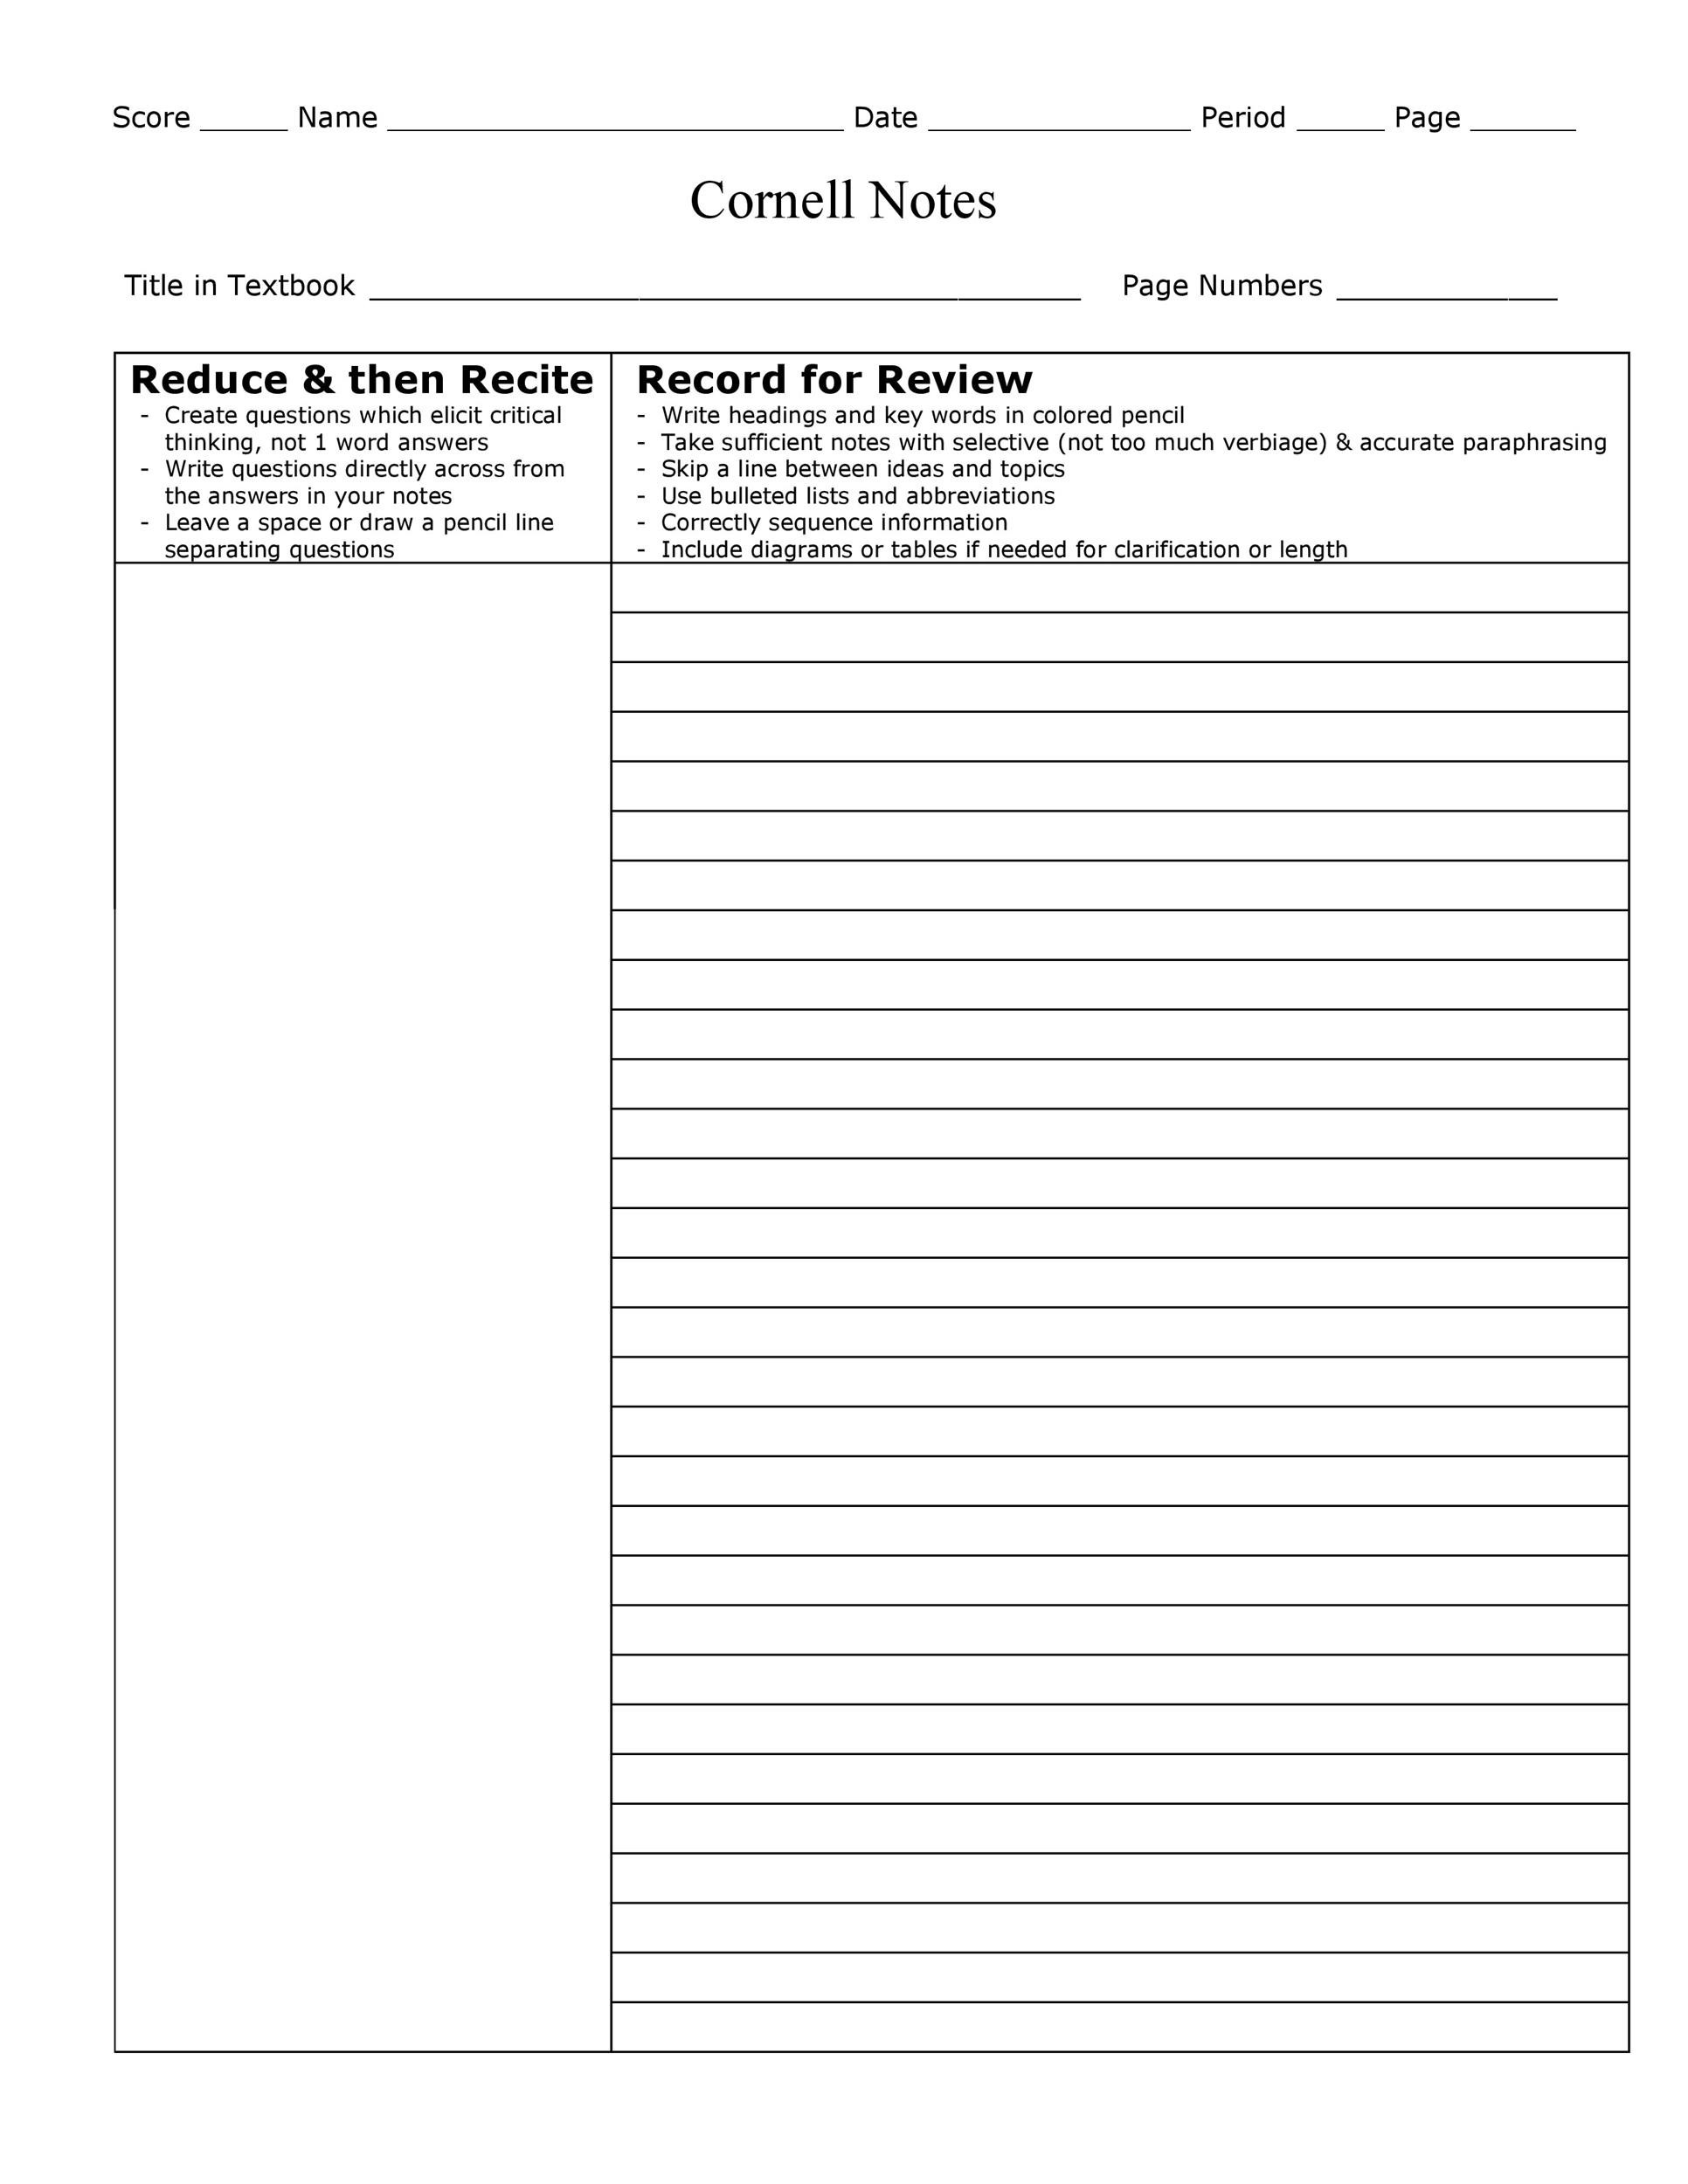 Free Cornell Notes Template 30